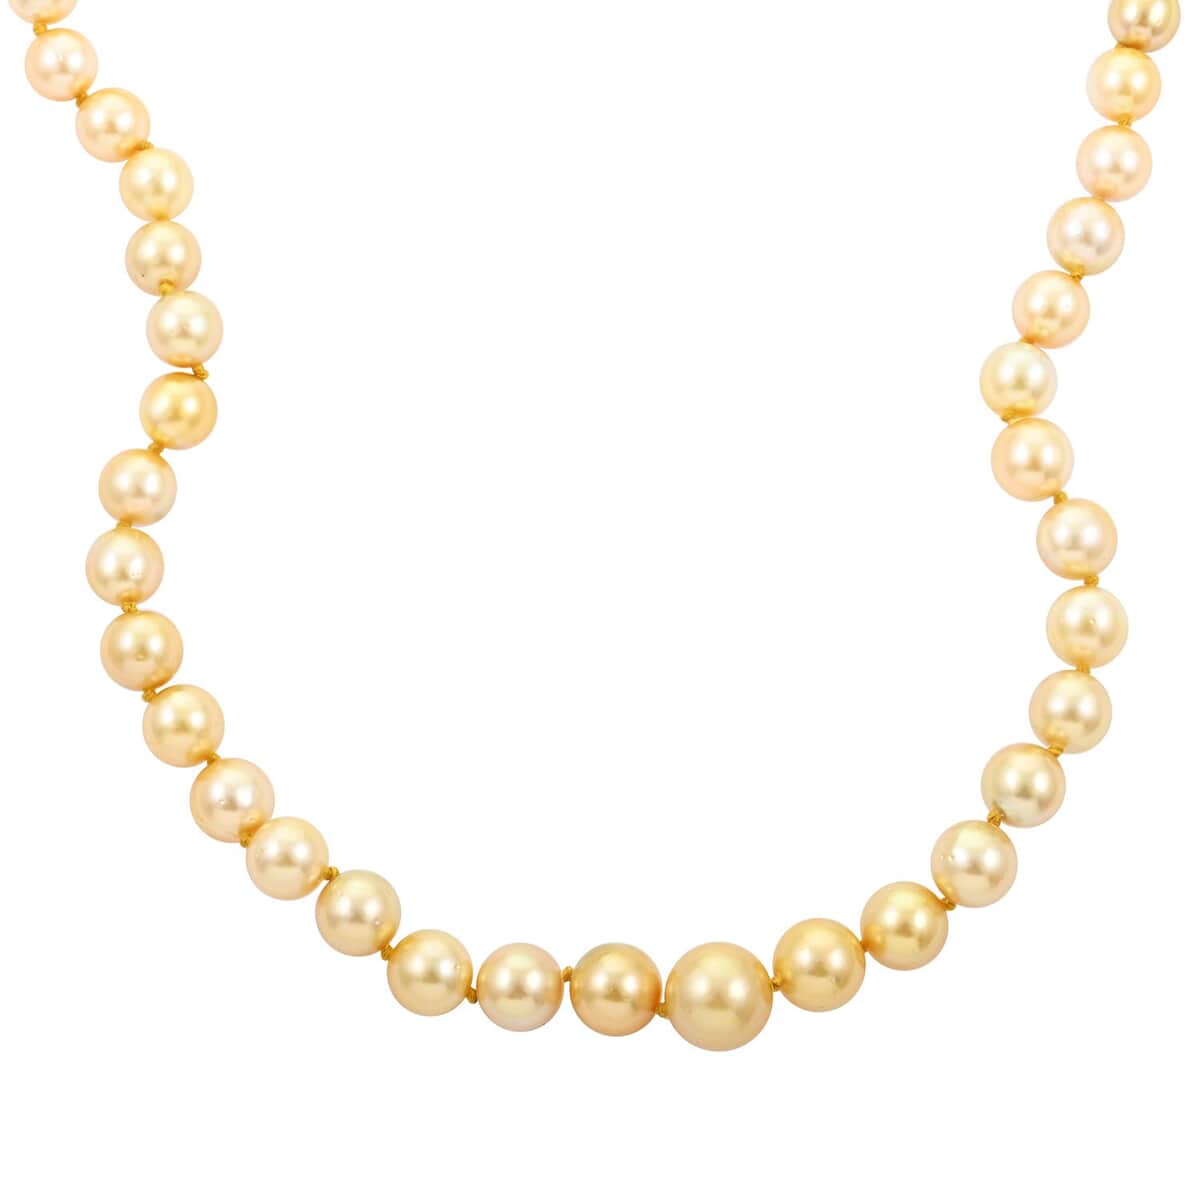 Iliana Certified & Appraised AAAA South Sea Golden Pearl 8-10mm Graduation Necklace in 18K Yellow Gold (18 Inches), Pearl Jewelry for Women, Anniversary Necklace for Wife image number 2